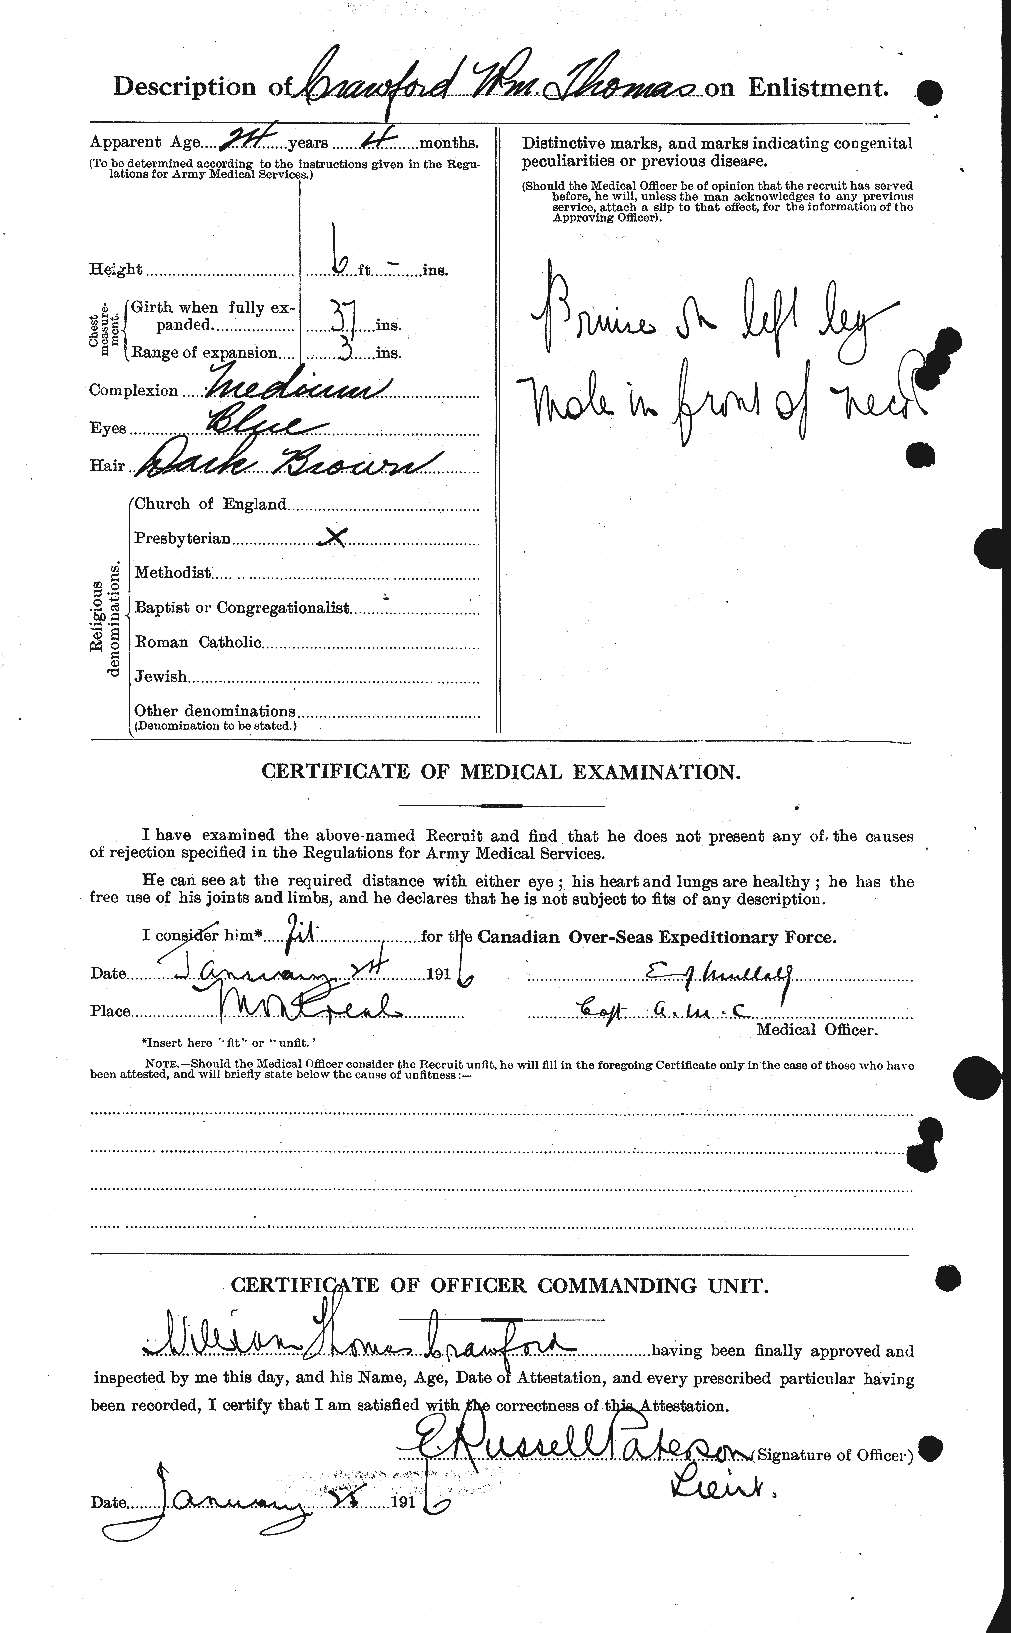 Personnel Records of the First World War - CEF 060684b